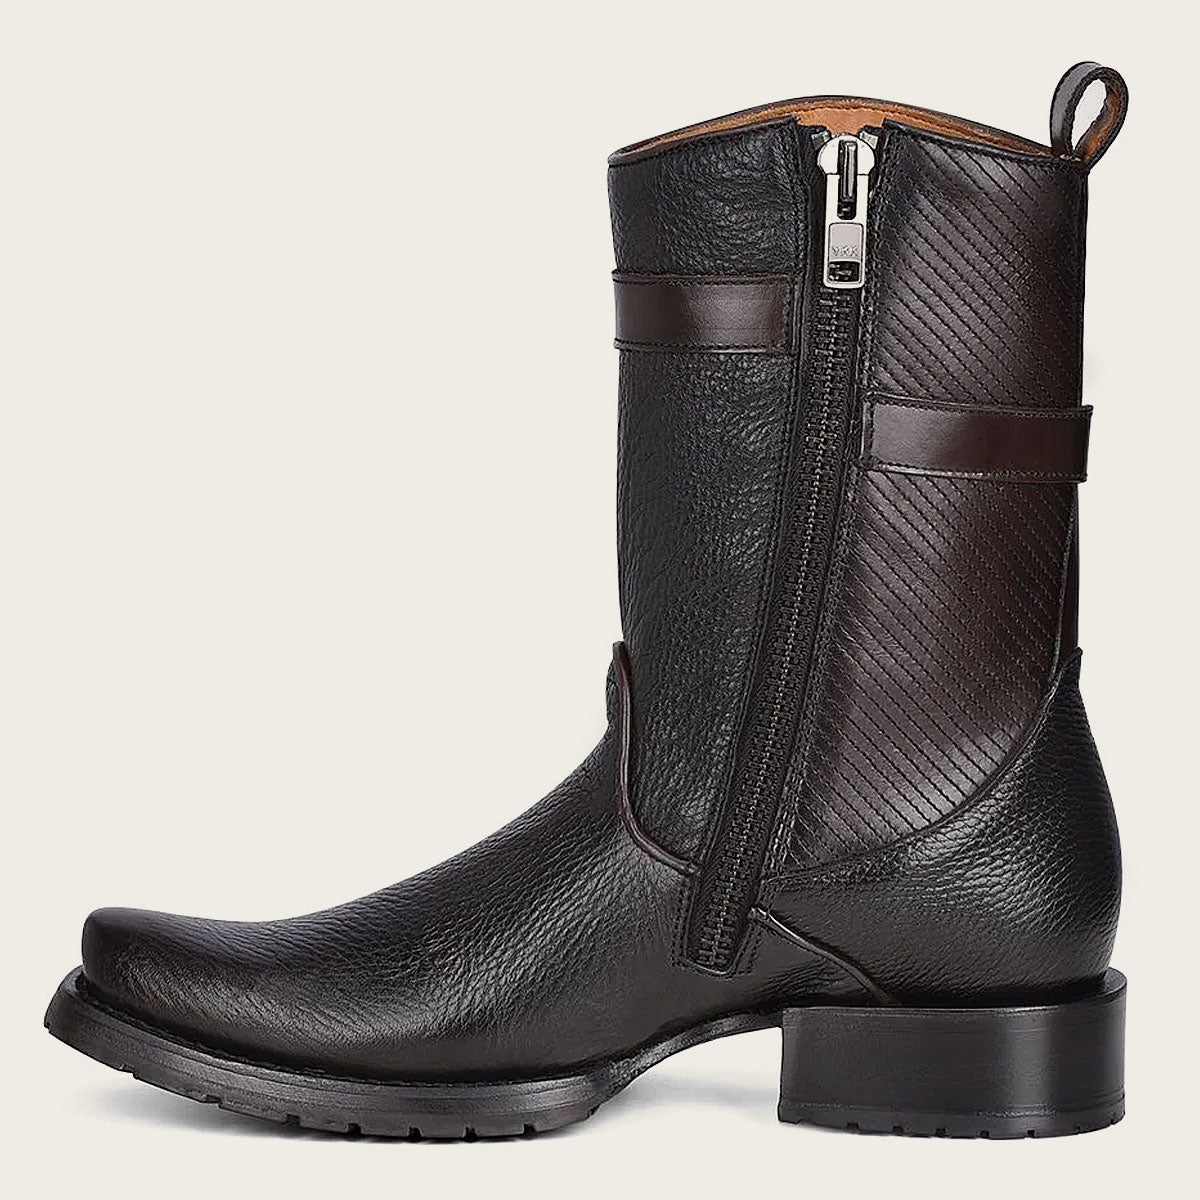 Premium Men's Bovine Leather Boots with Cuadra Logo Embroidery and Strap Detail